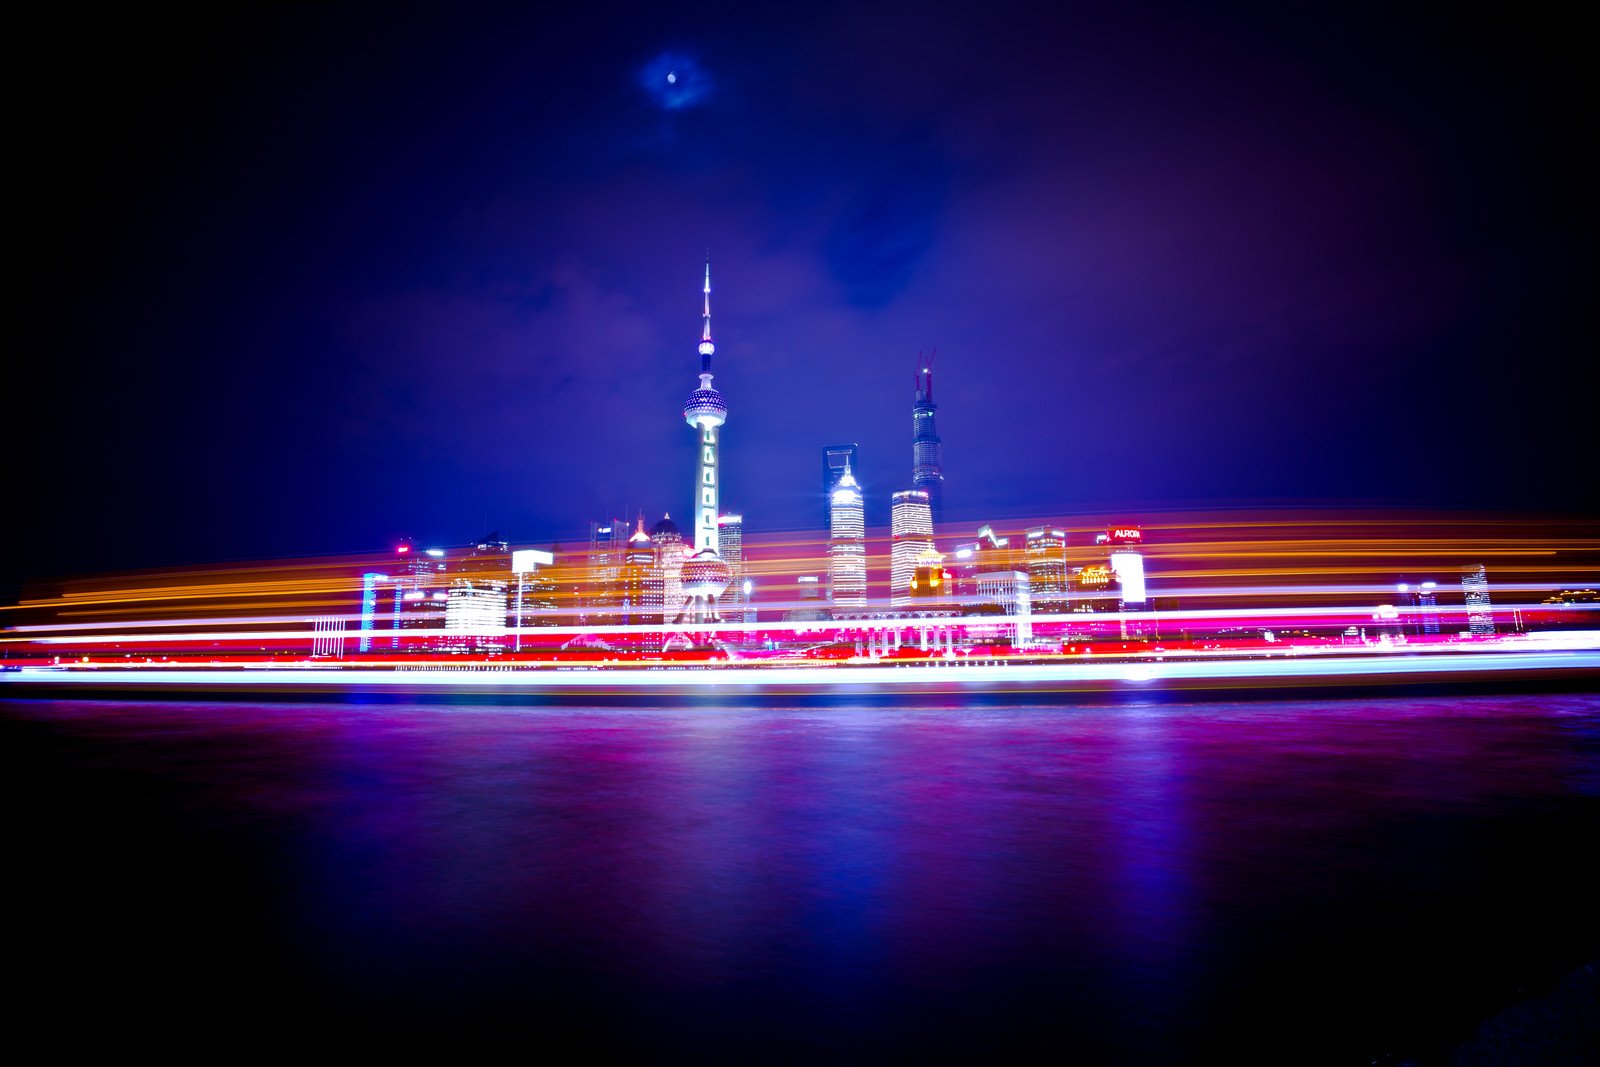 architecture, Asia, Asian, Asians, Chine, China, Buildings, Cities, Citylifes, Cityscapes, Light, Night, Skyline, Skylines, Skyscrapers, Bridges, Highways, Shanghai Wallpaper